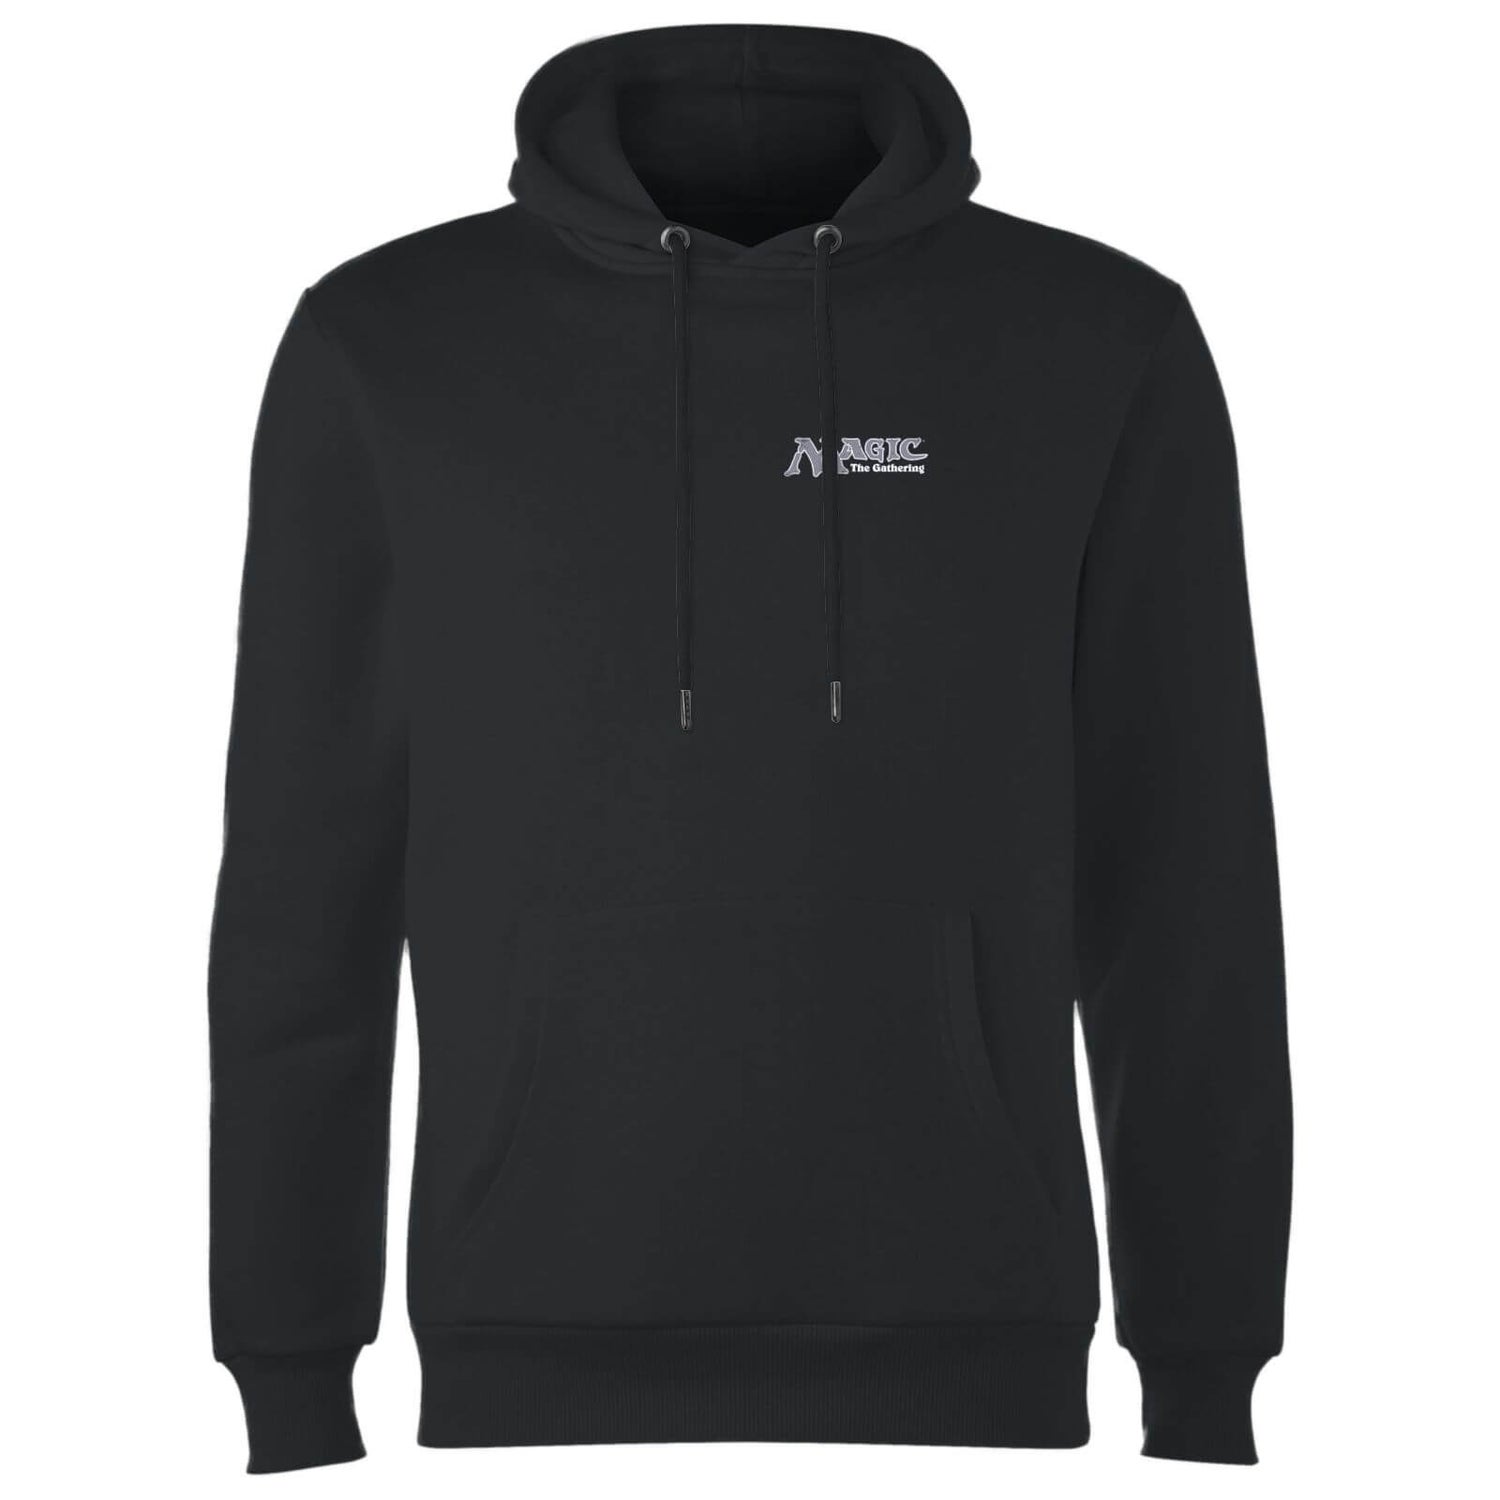 Magic: the Gathering Leader Of The Pack Unisex Hoodie - Black